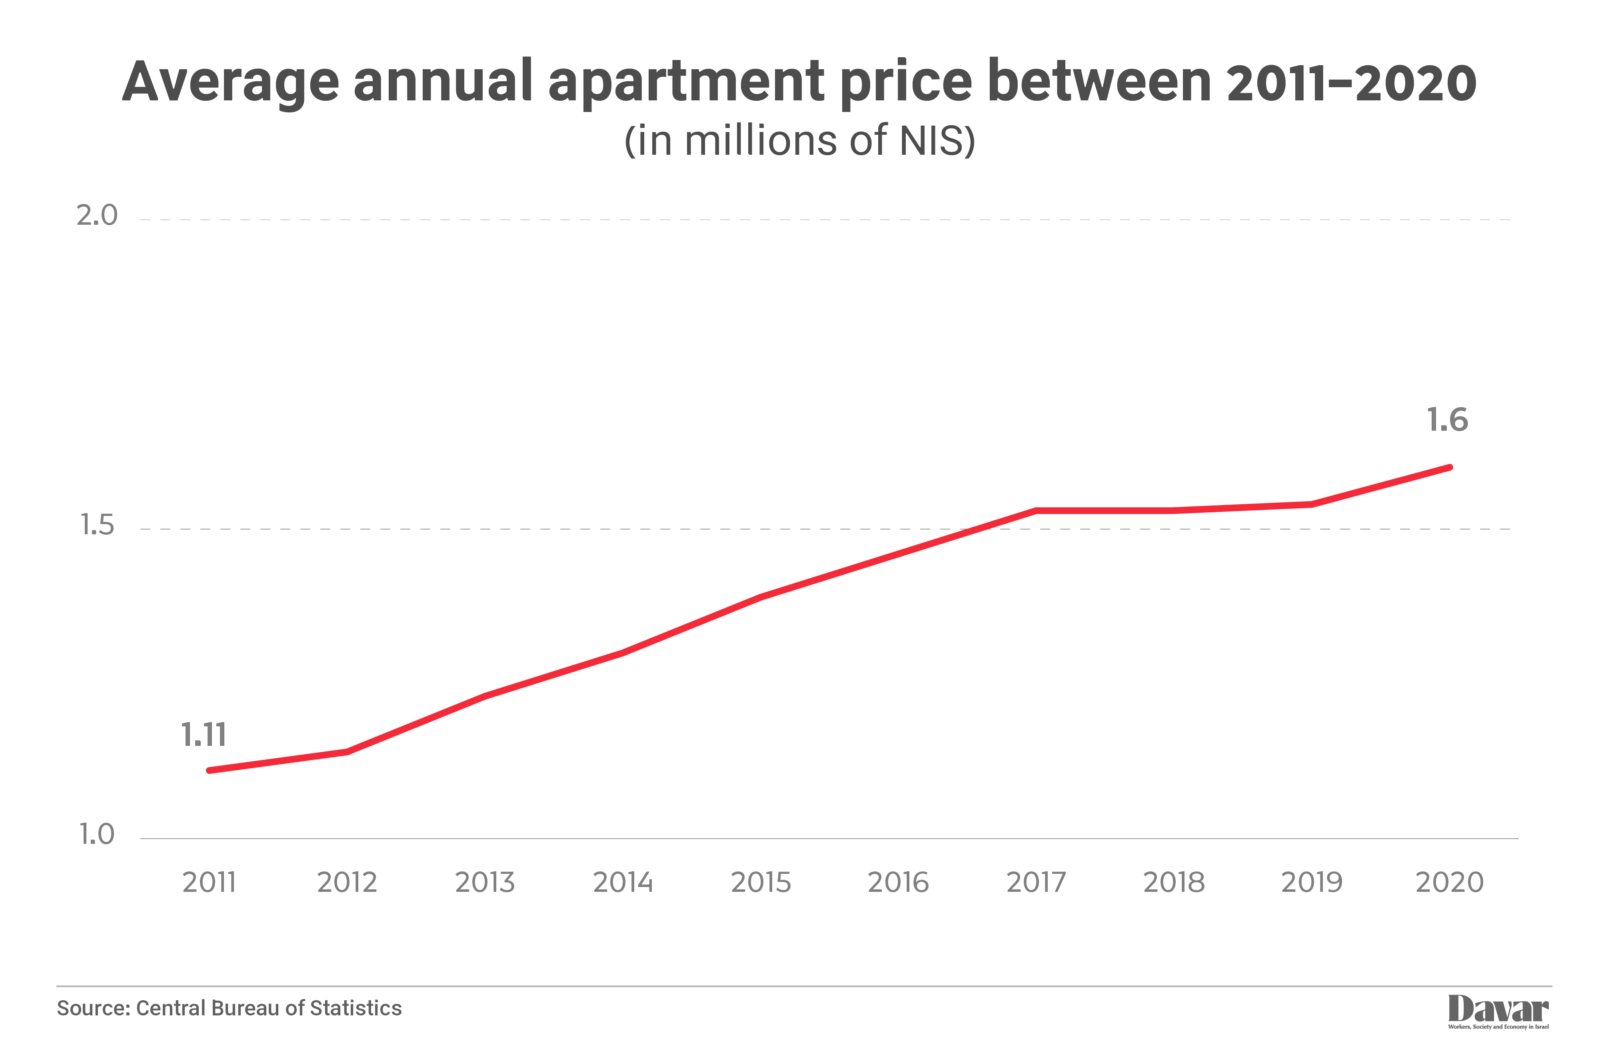 Average annual apartment price between 2011-2020. In 2011 the average cost of an apartment was 1.11 million NIS while (Graphics: IDEA)